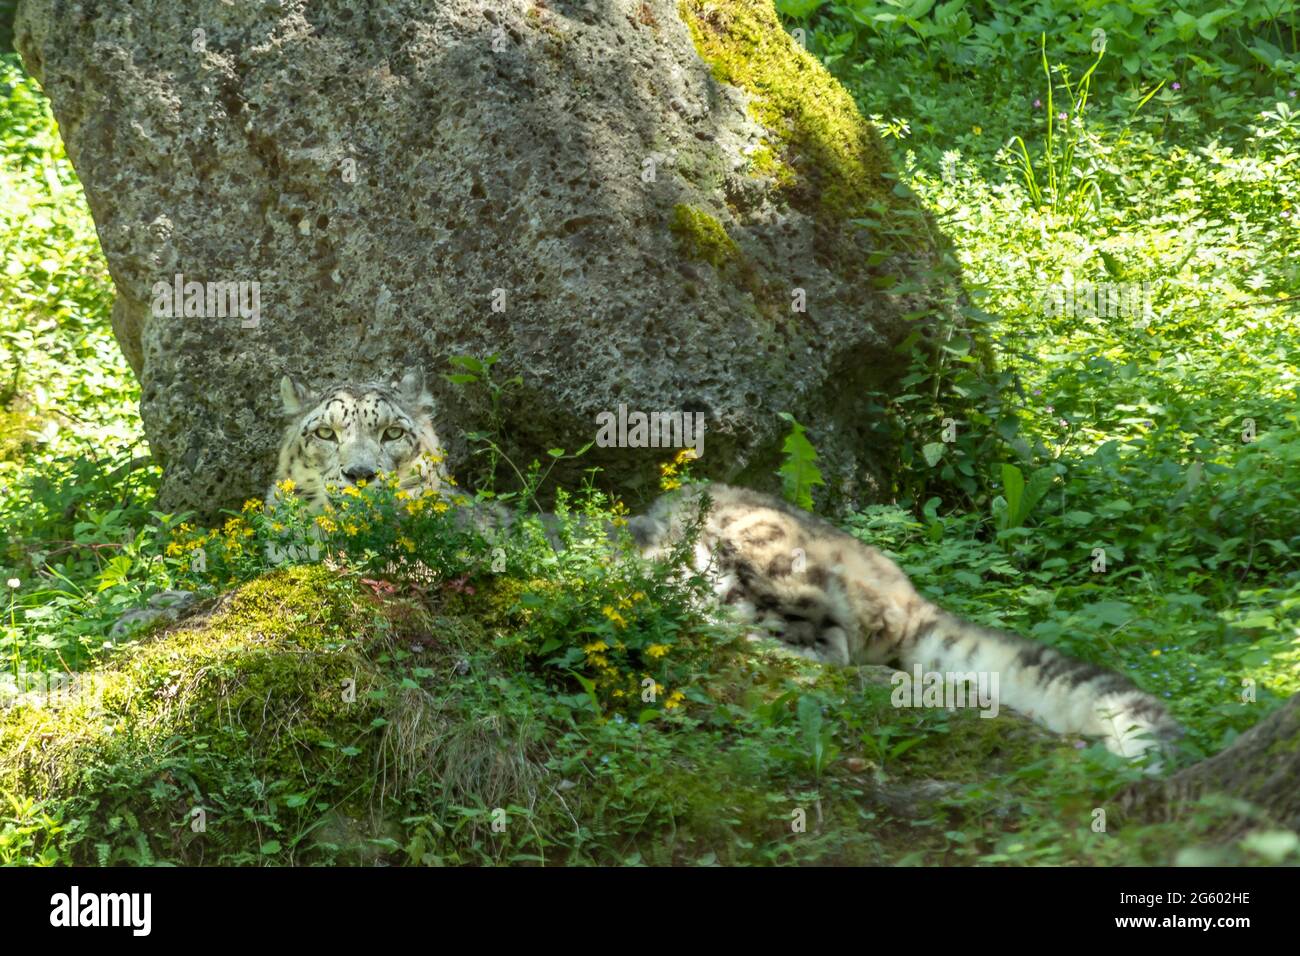 snow leopard resting on shadow, behind flowers Stock Photo